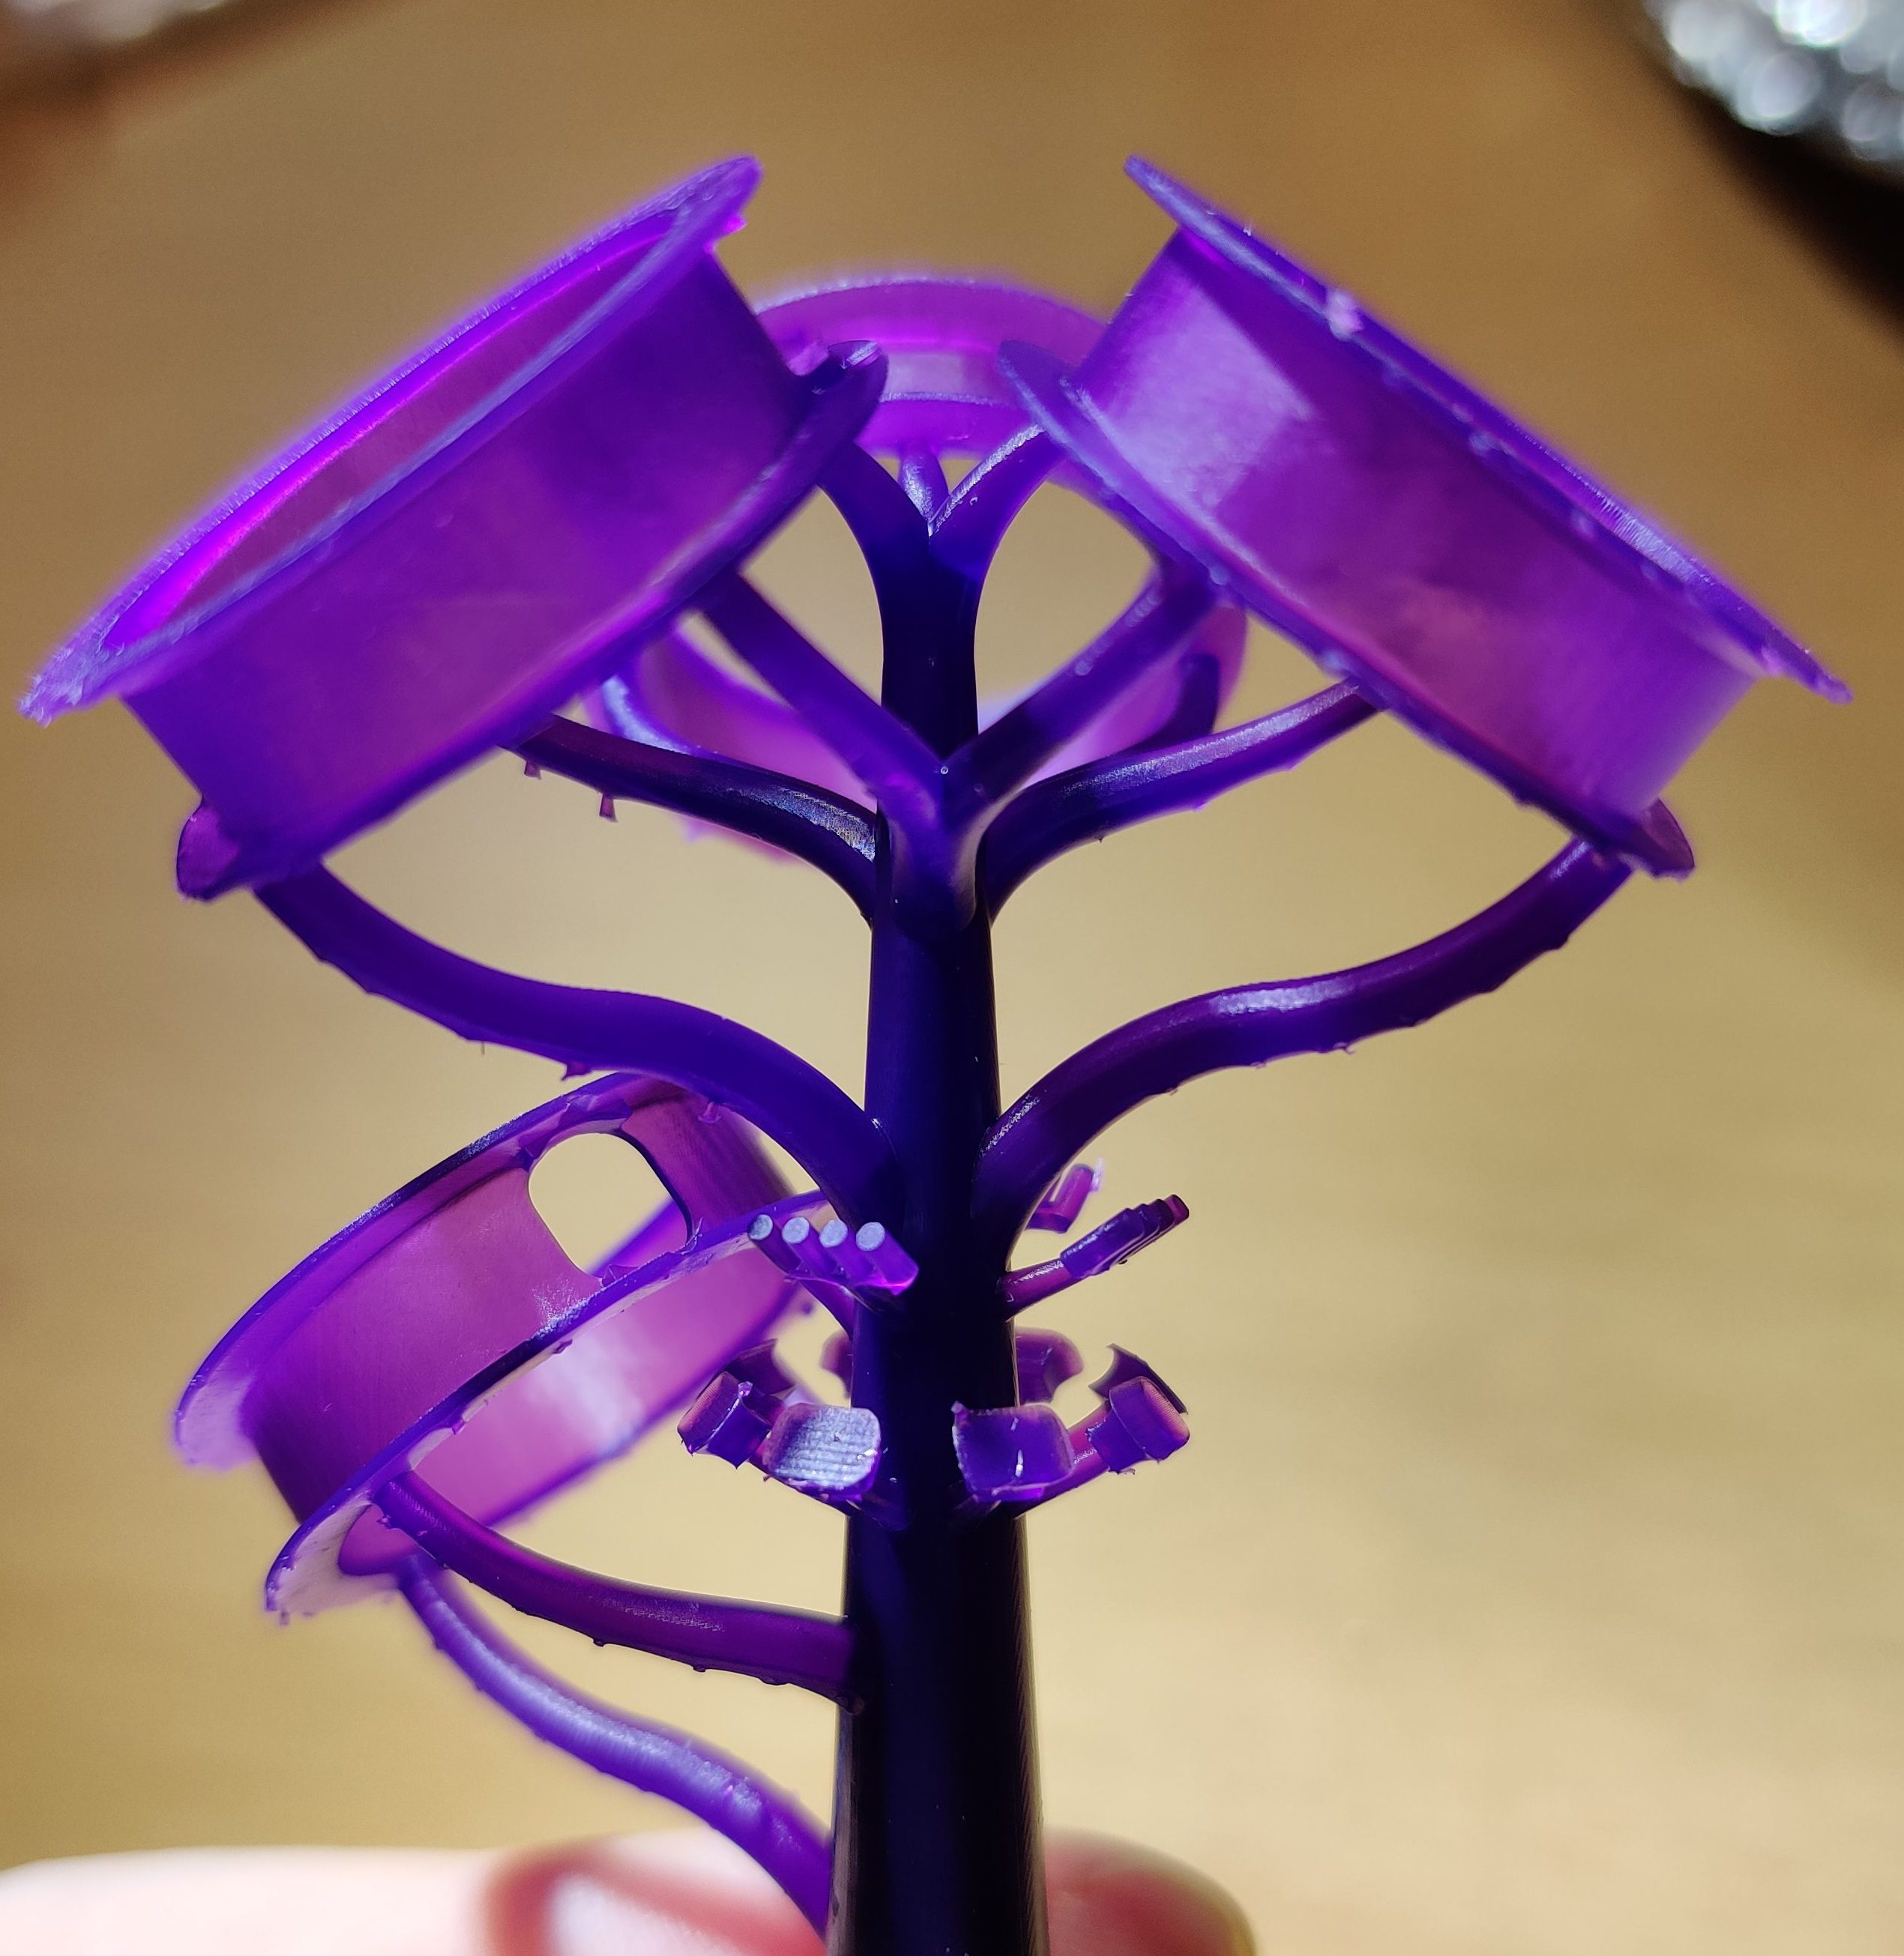 3D Printed Casting Tree, Close Up.